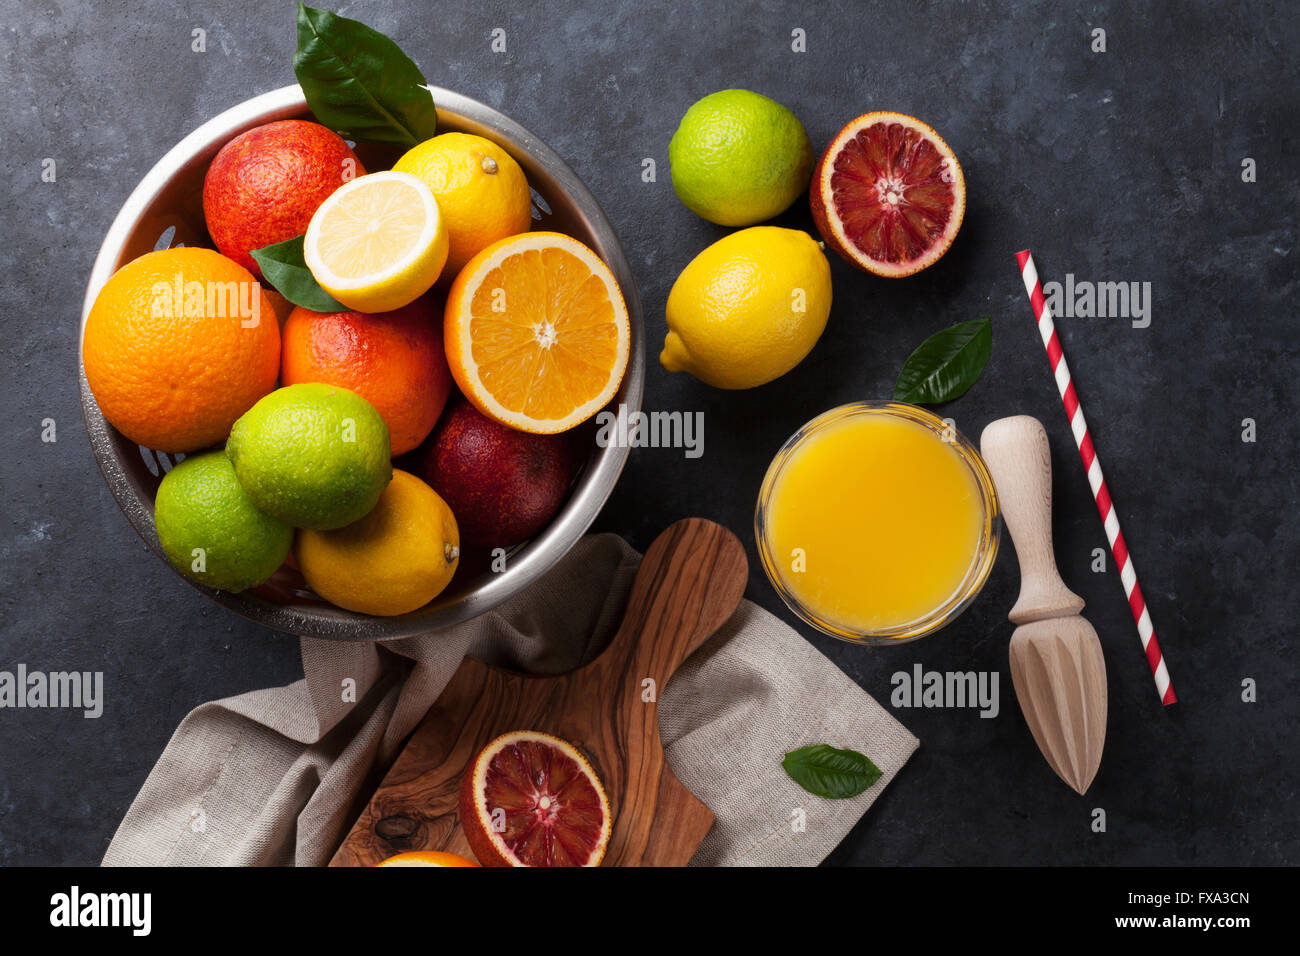 Fresh ripe citruses and juice. Lemons, limes and oranges on dark stone background. Top view Stock Photo